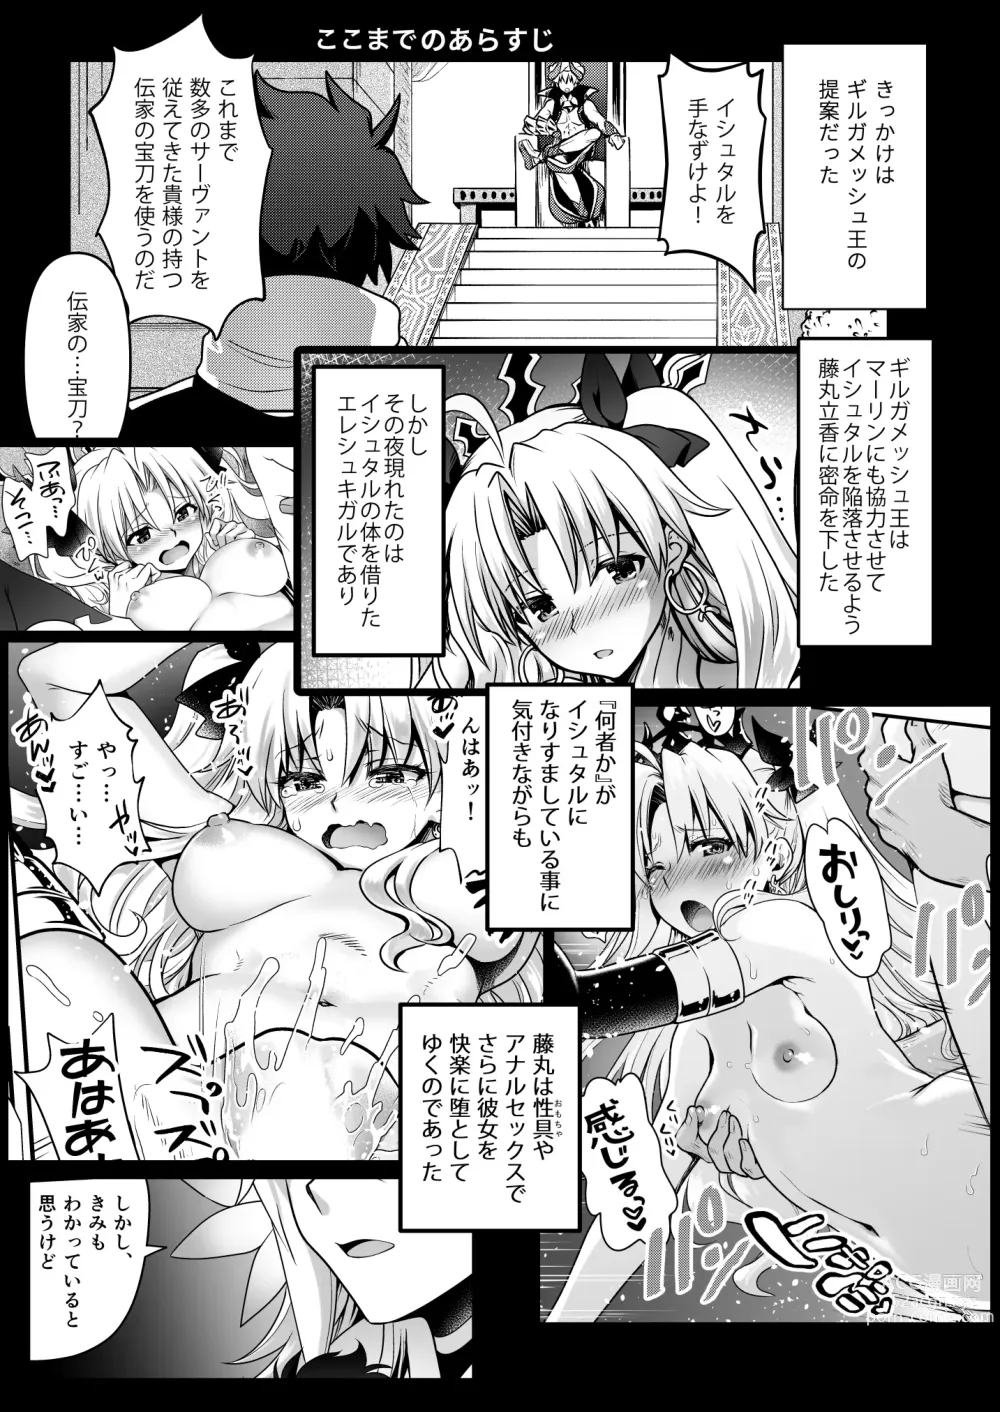 Page 2 of doujinshi All Night Romance 3